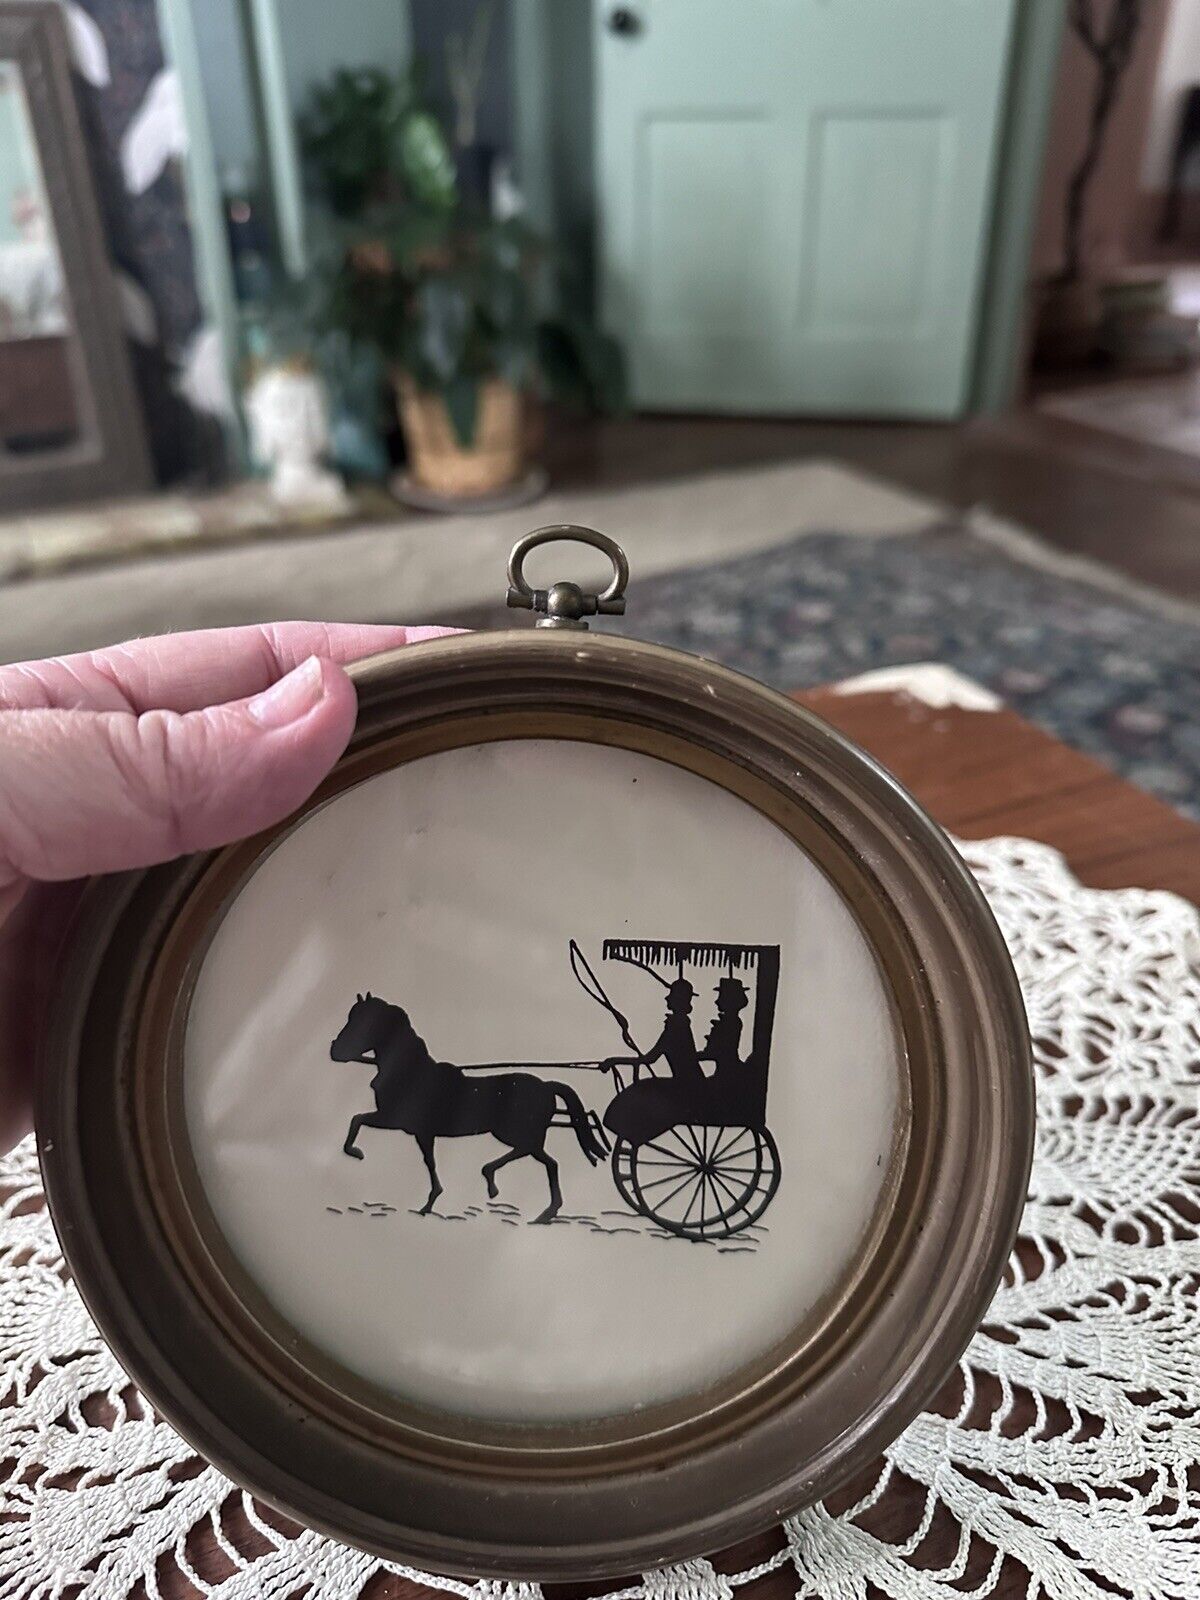 Vintage 1960s Horse Drawn Carriage Silhouette Style Round Picture. 